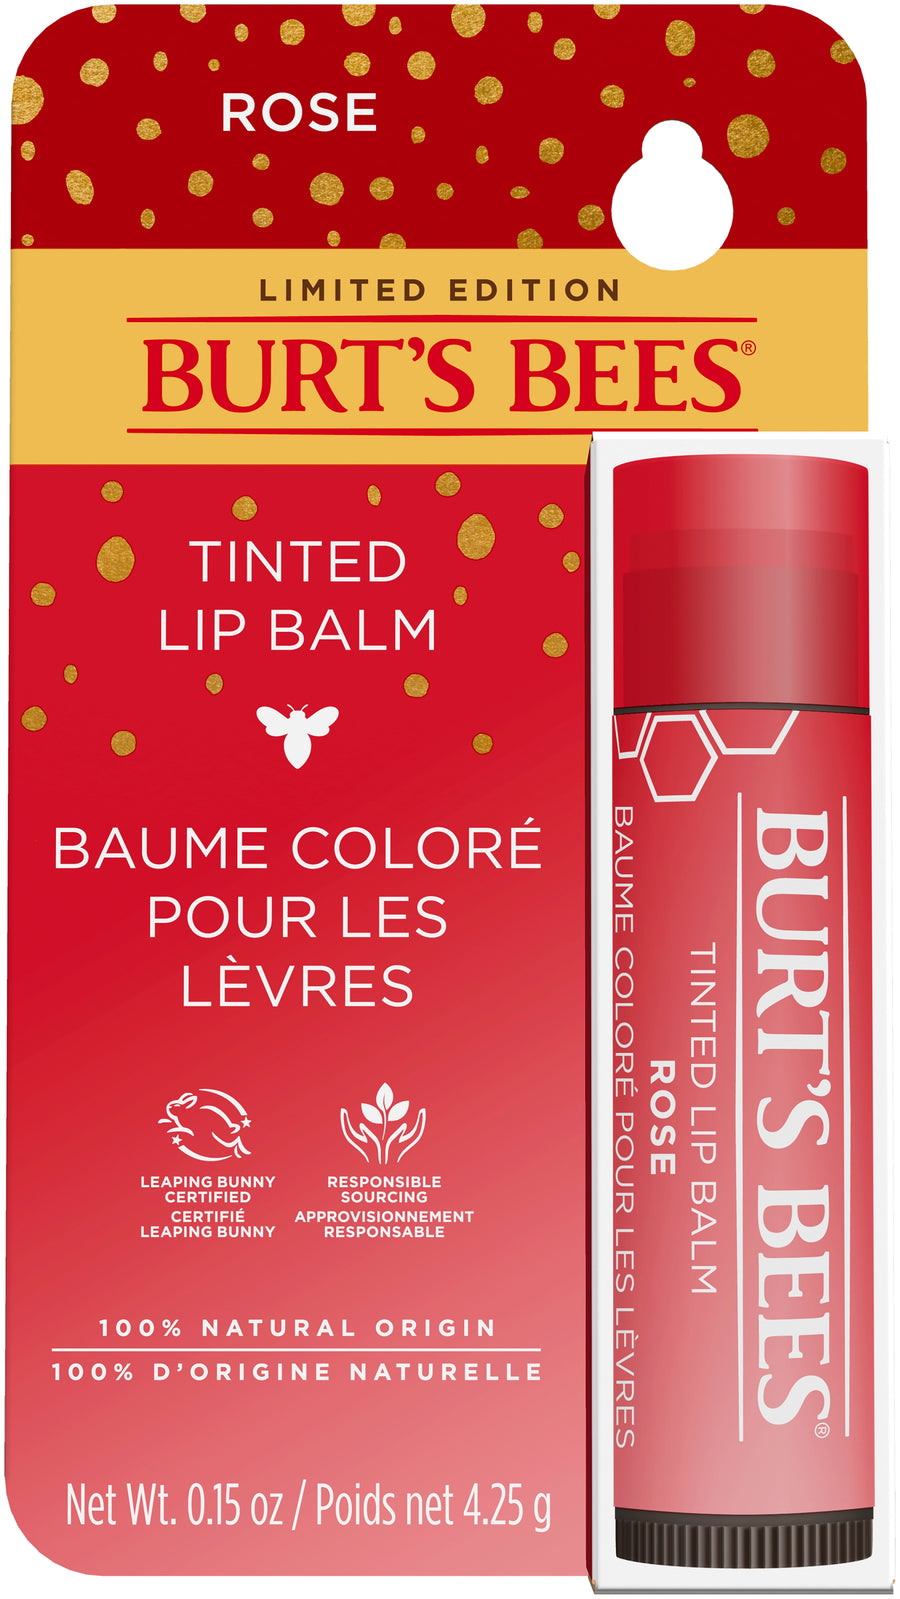 Burt's Bees Limited Edition Rose Tinted Lipbalm